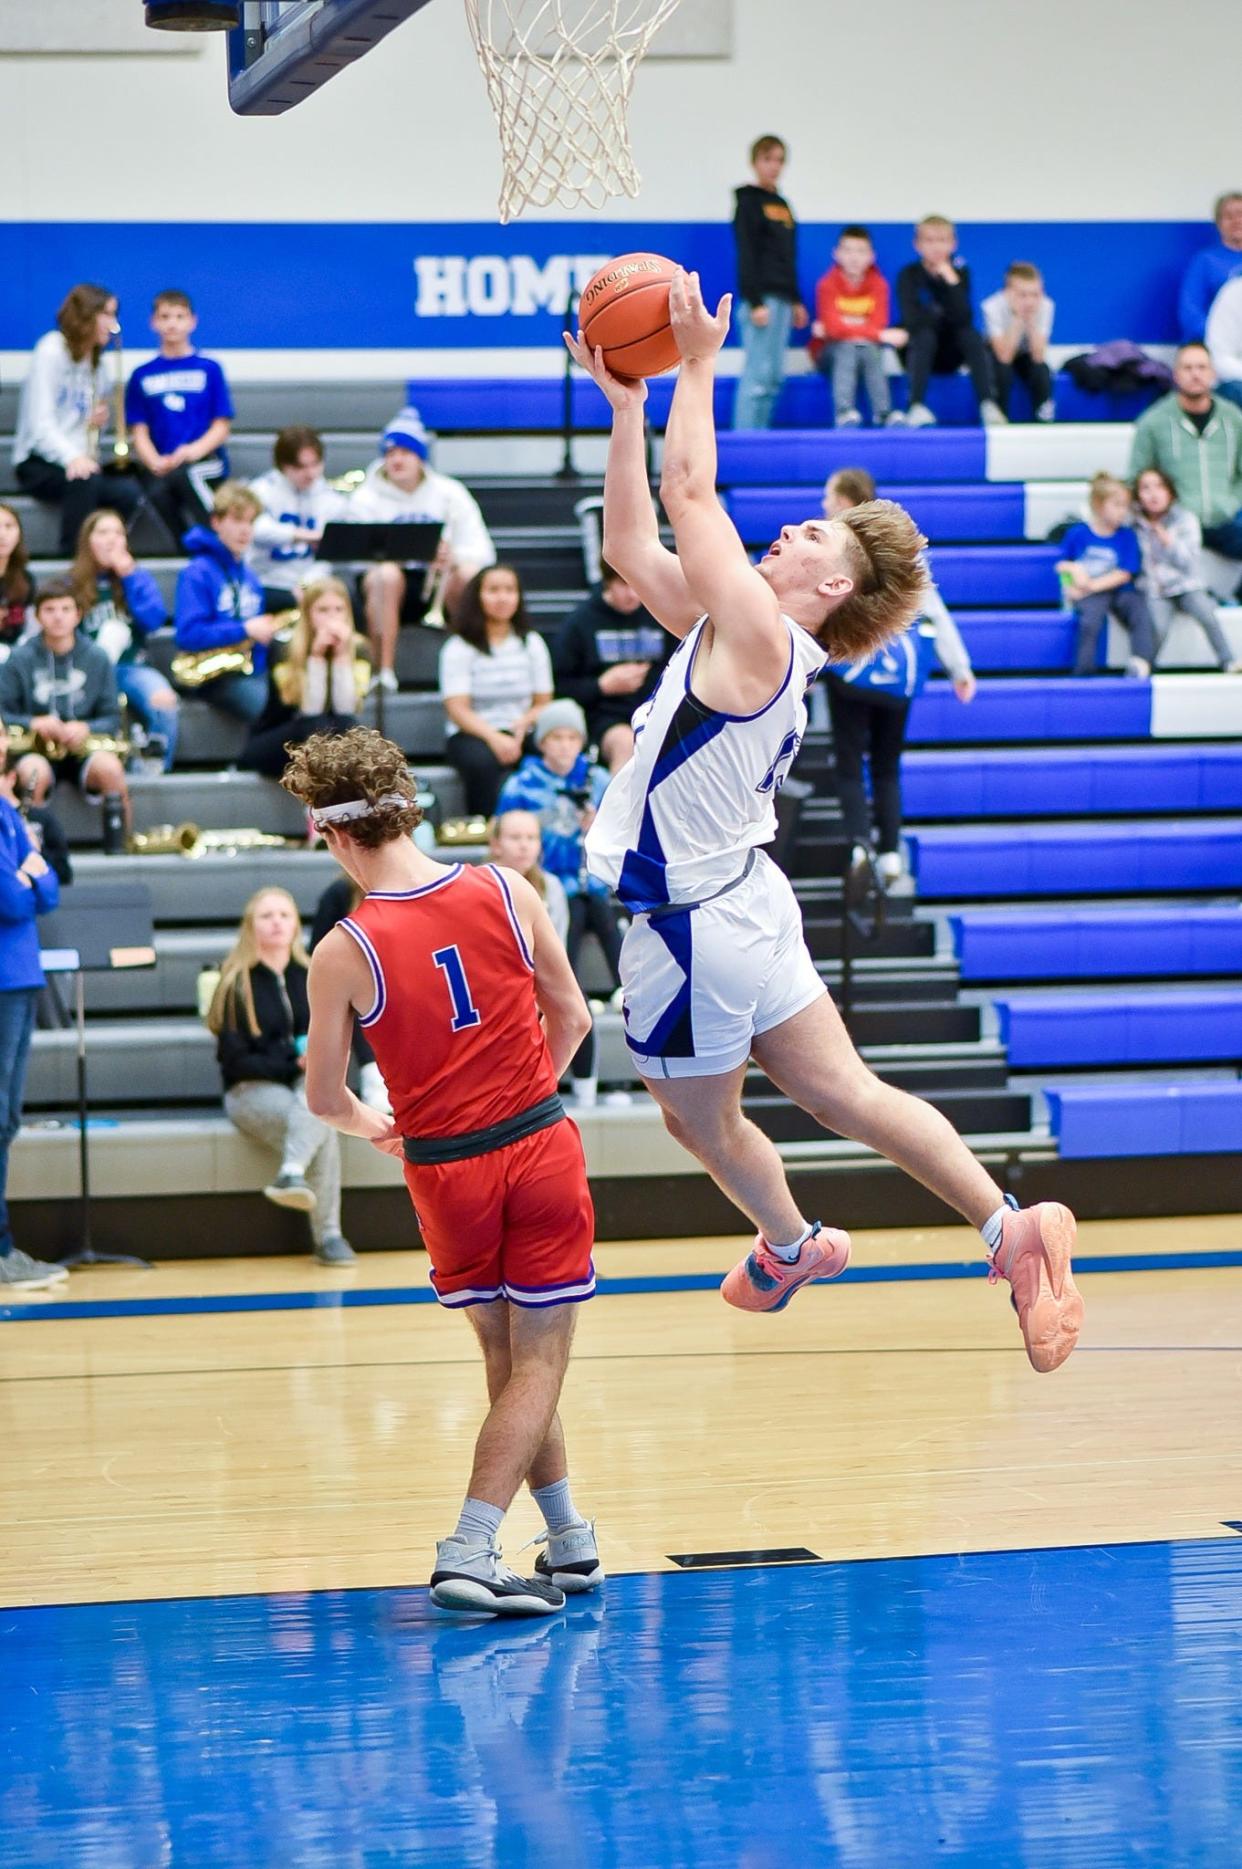 Michael Banks goes up for a shot during a game against Interstate 35 on Friday, Dec. 2, 2022, at Van Meter.